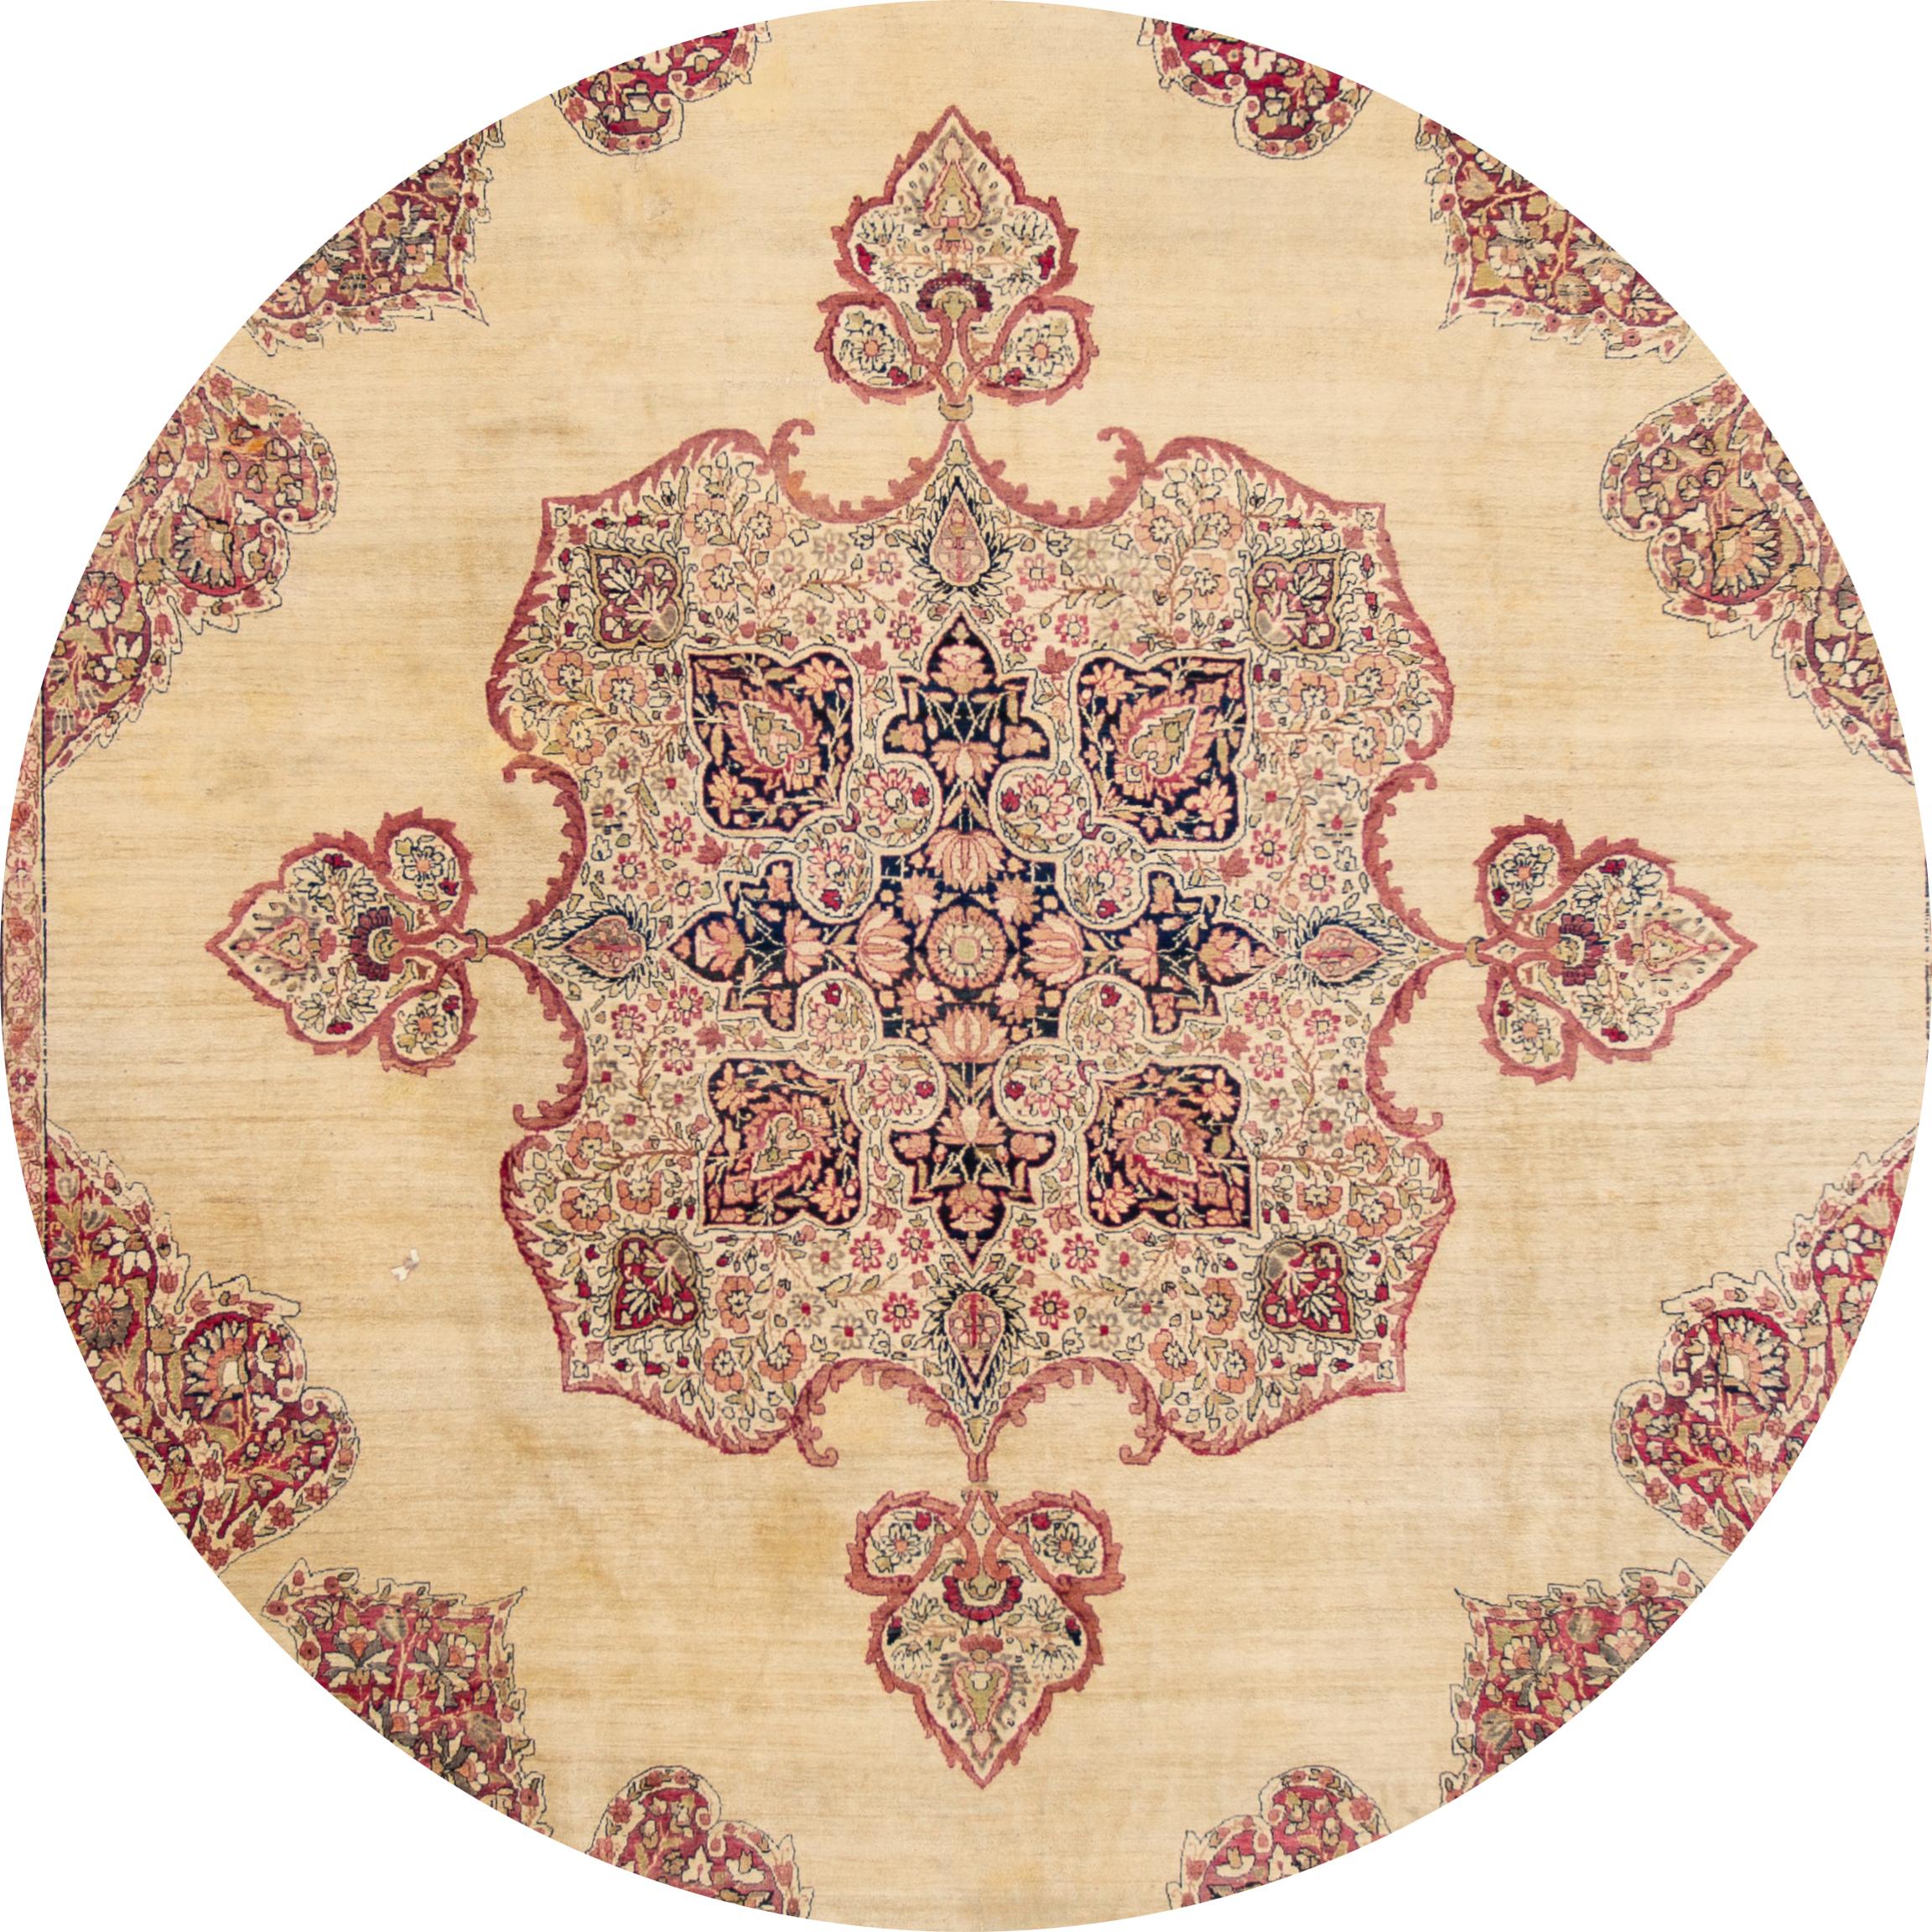 Beautiful antique Kerman rug, hand knotted wool with a pink field, tan and ivory accents in a center floral medallion design, circa 1920.
This rug measures 10' 10